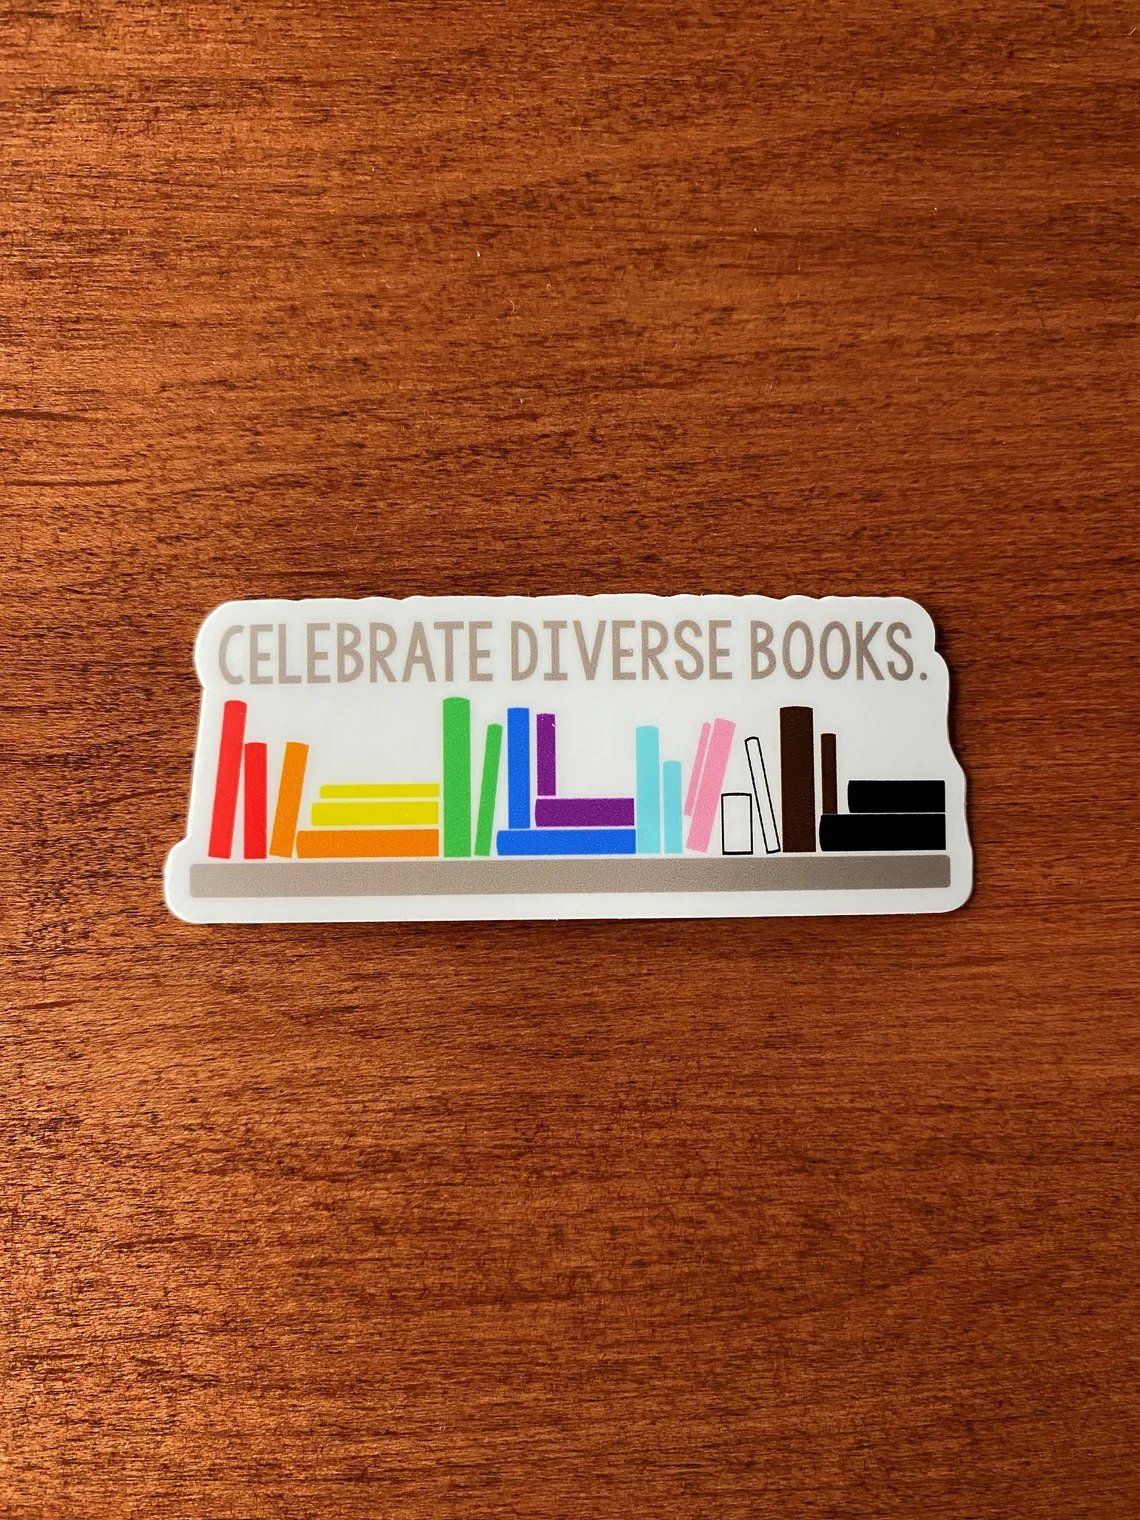 diverse rainbow book stack sticker against a woof surface